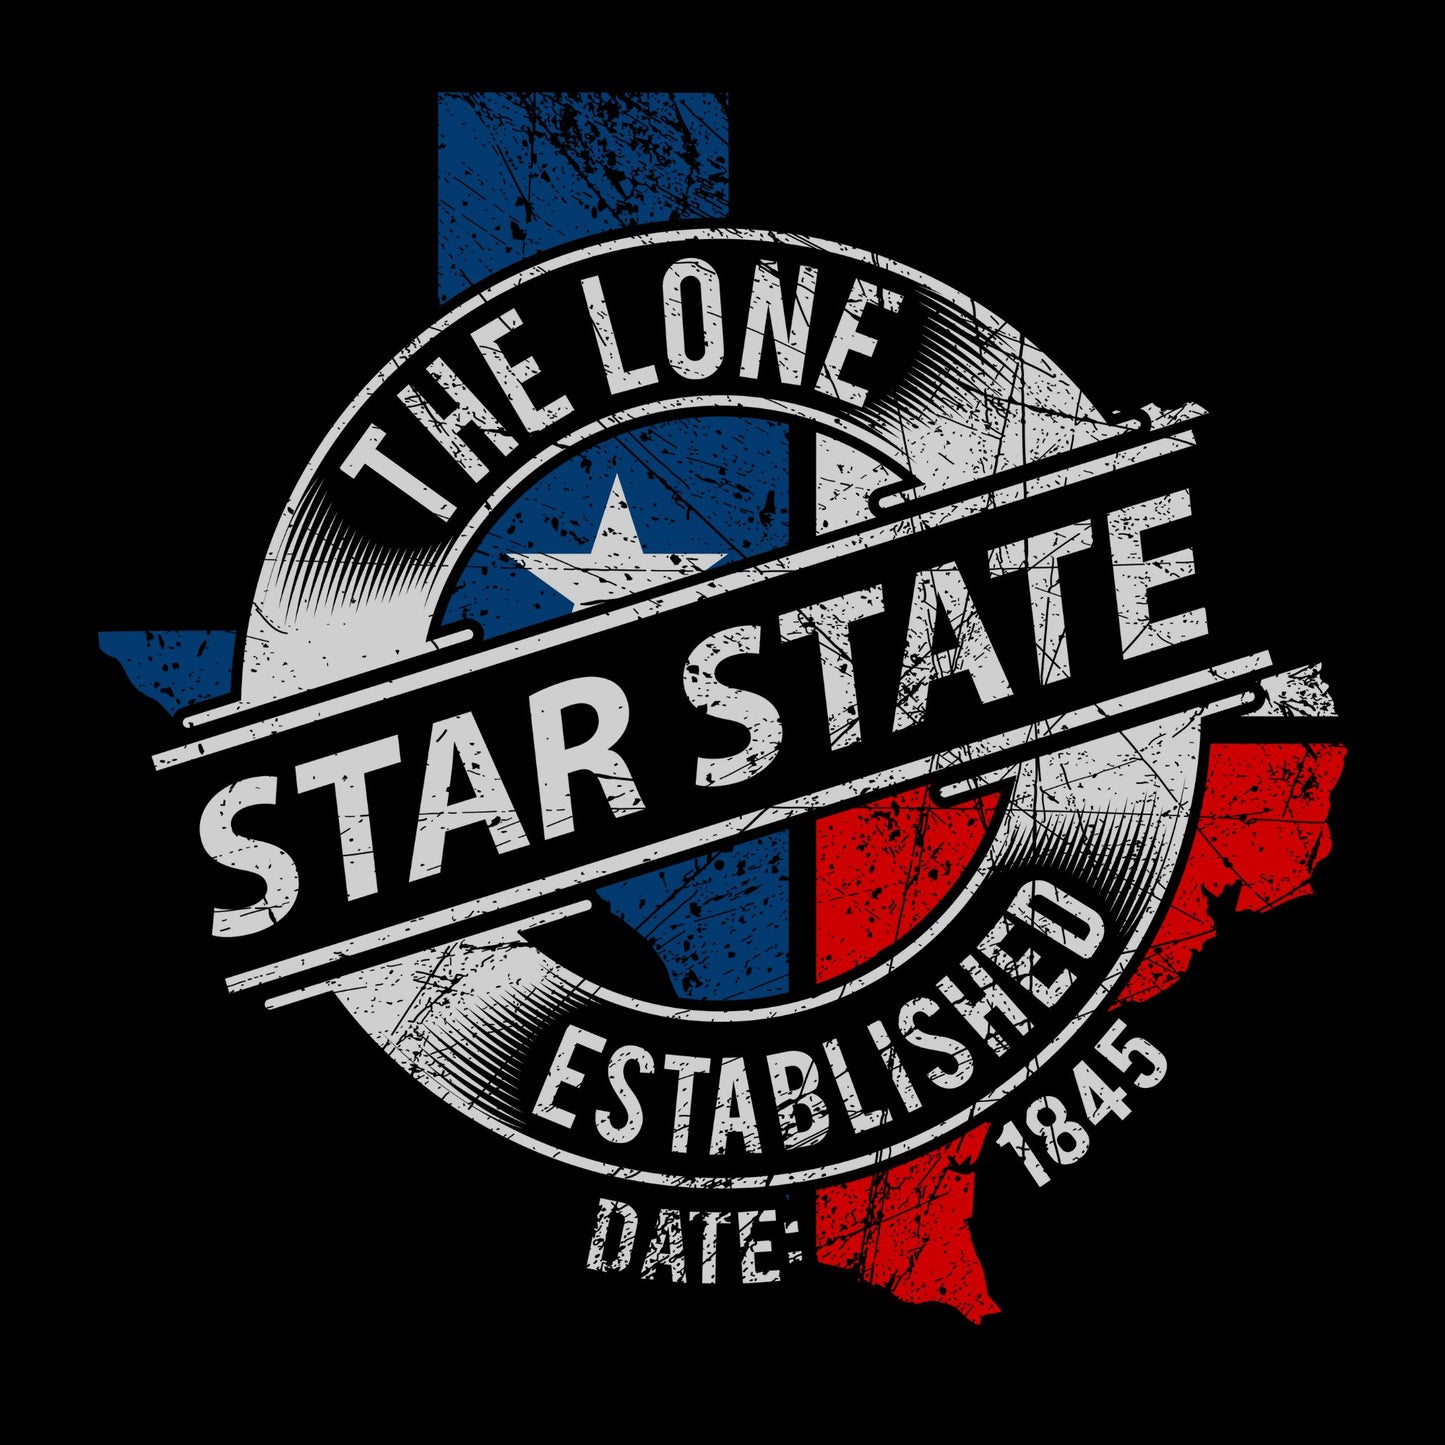 Texas Lone Star Established 1845 T-Shirt | Celebrate Texan Heritage with Stylish Apparel